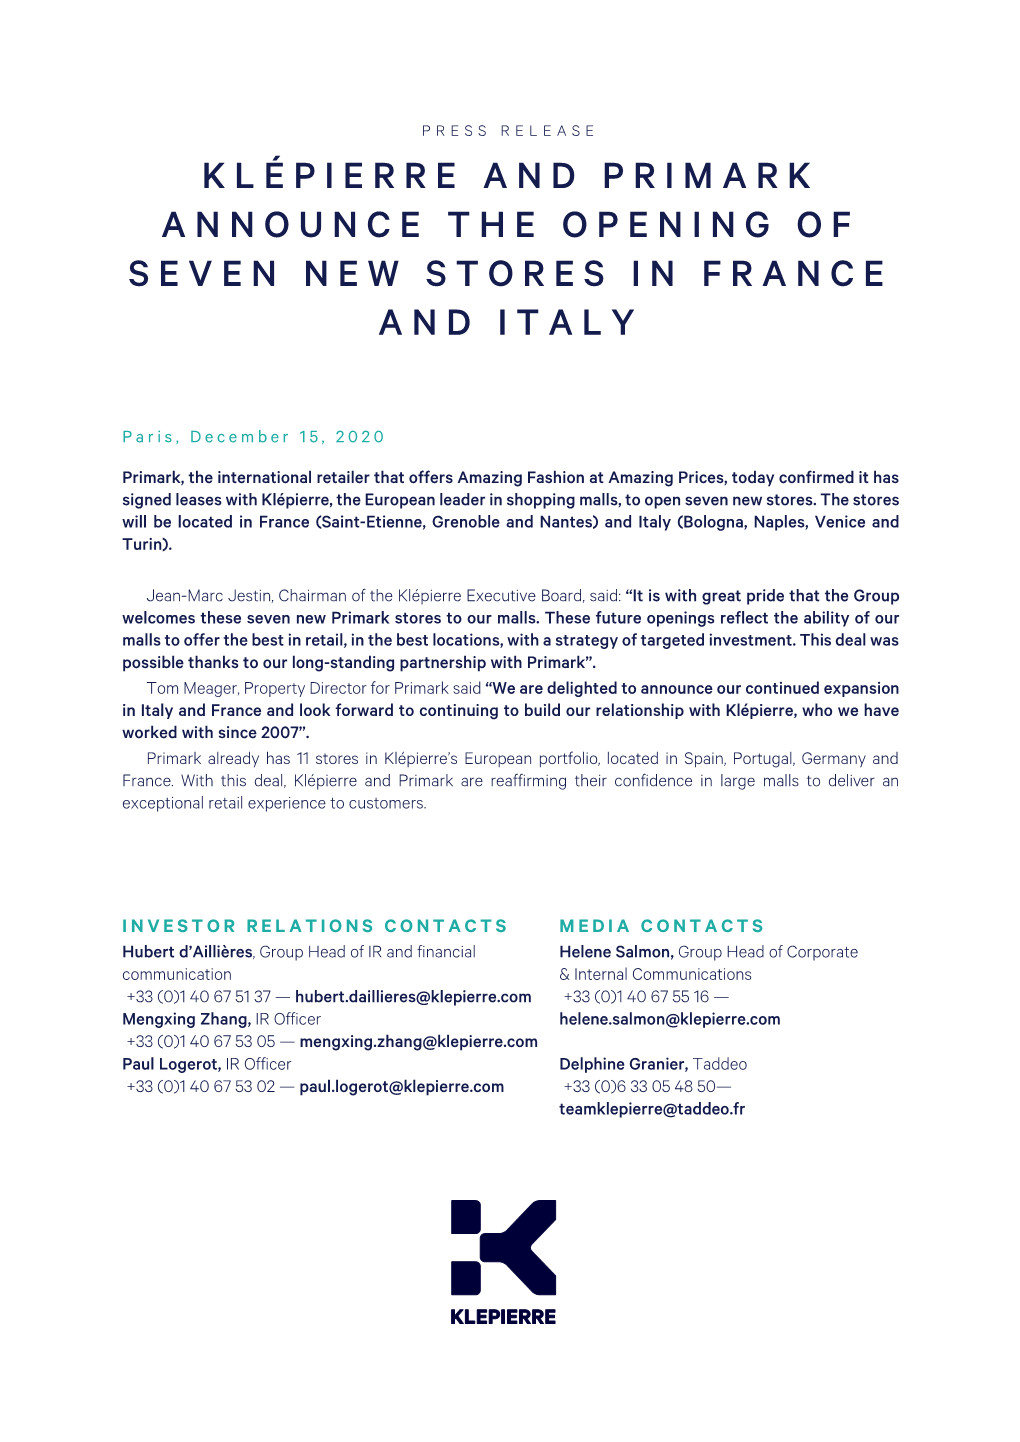 Klépierre and Primark Announce the Opening of Seven New Stores in France and Italy